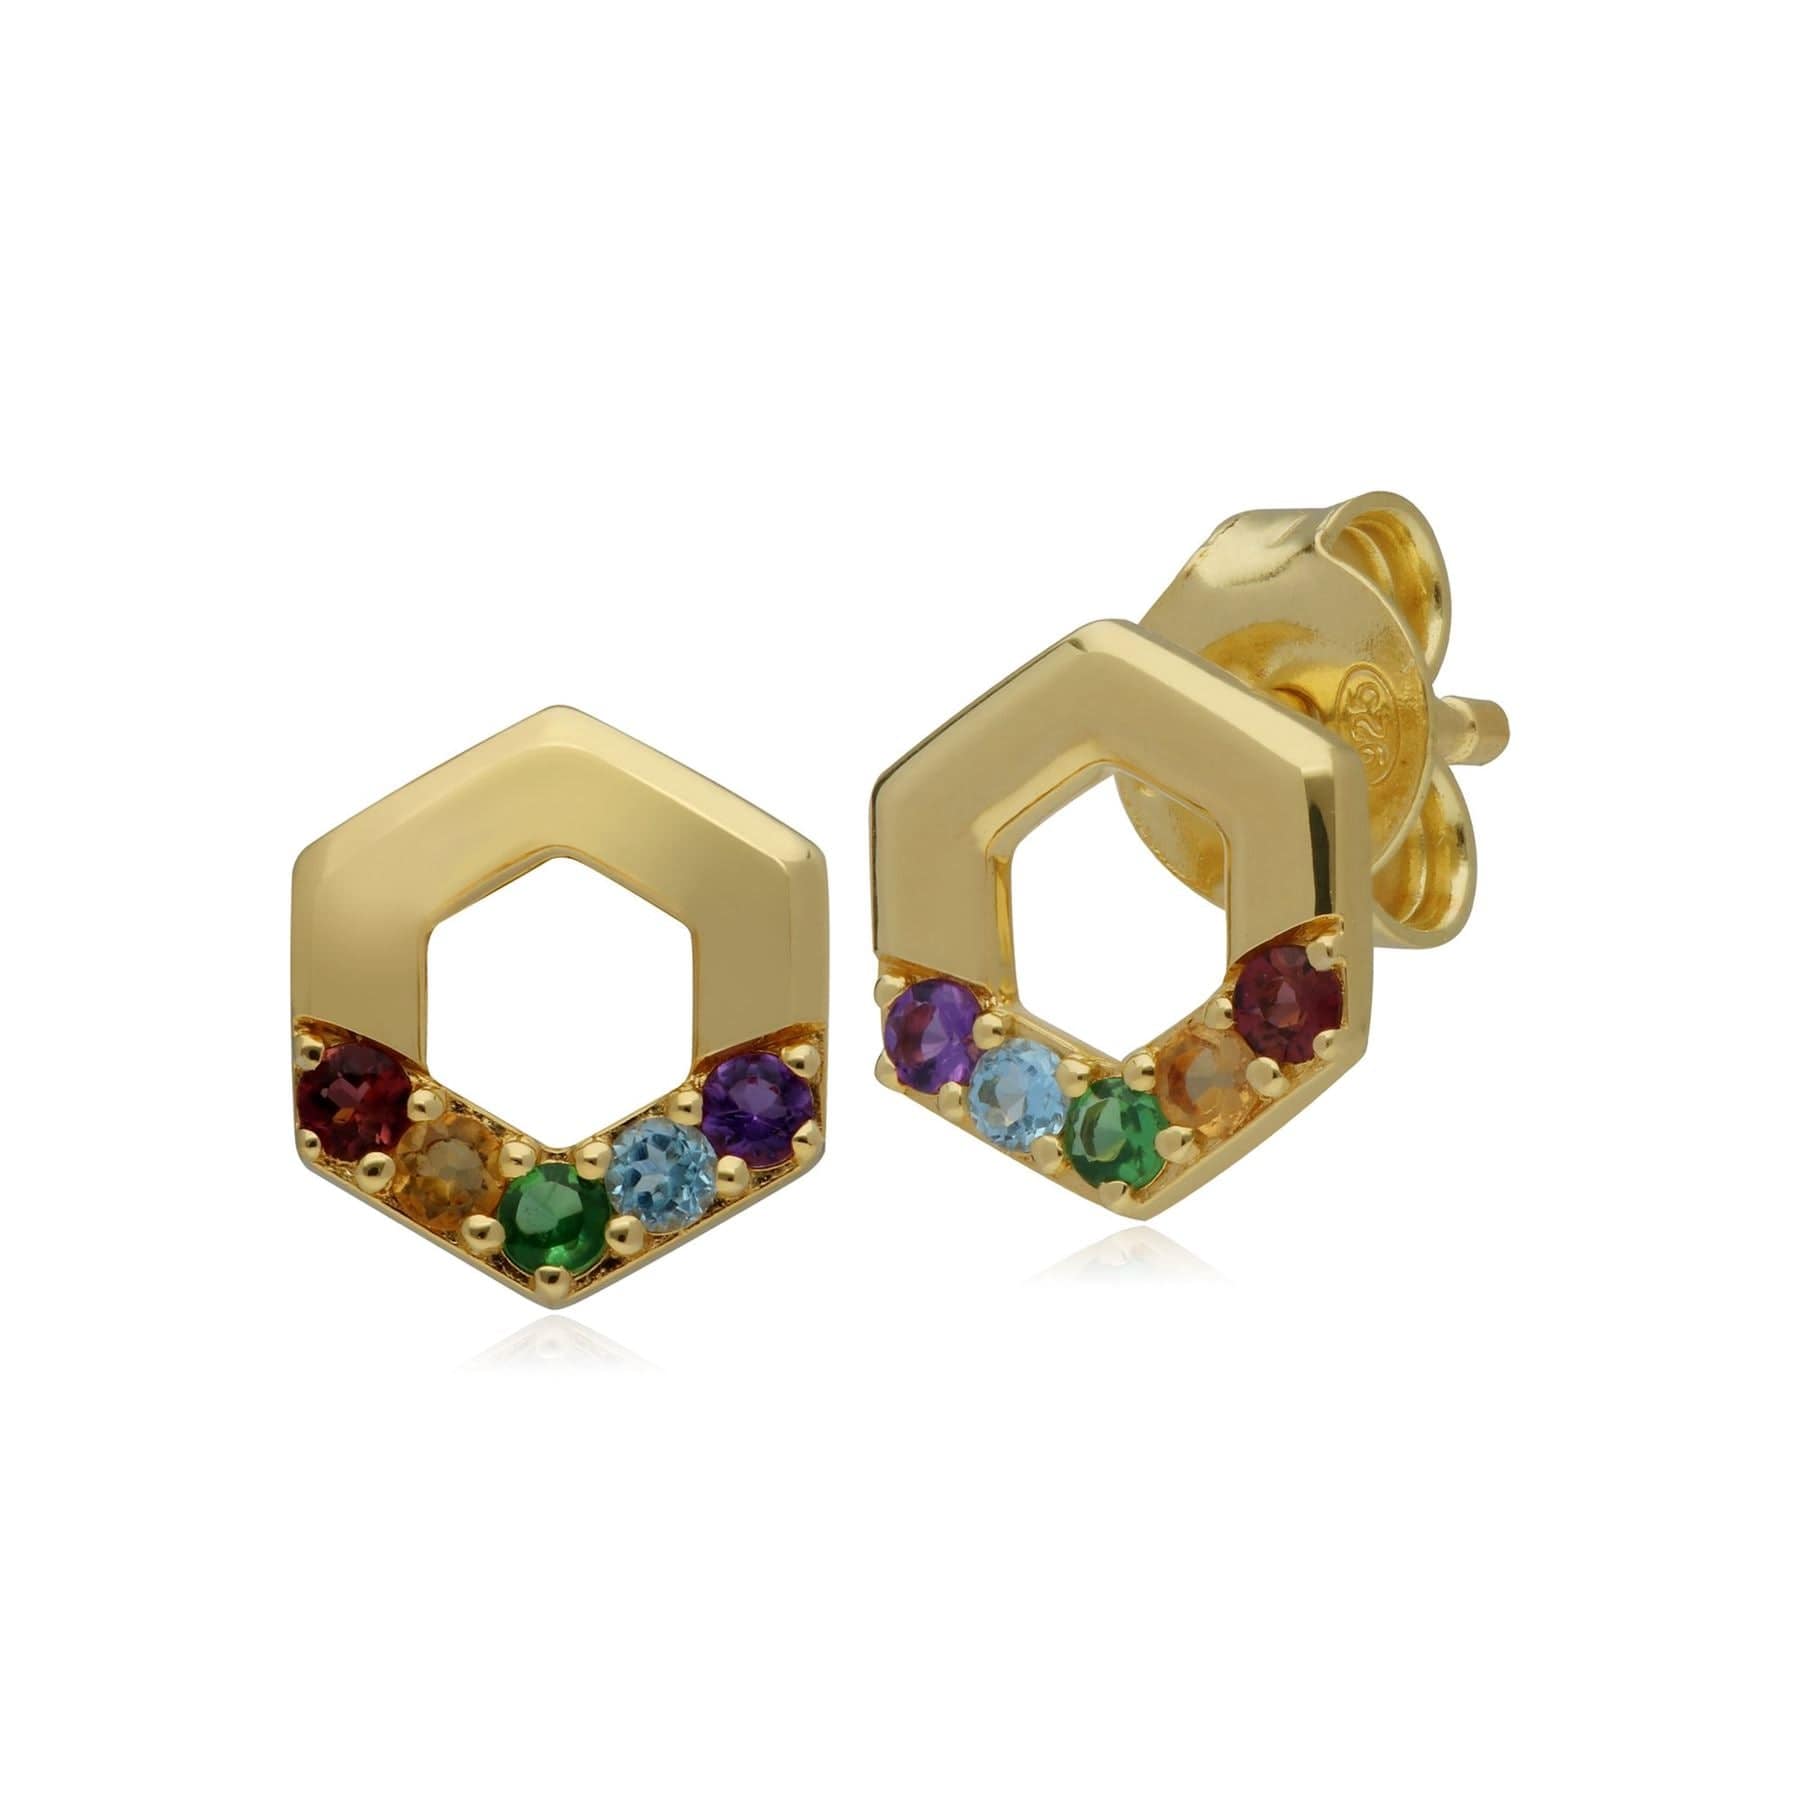 Rainbow Hexagon Stud Earrings in Gold Plated Sterling Silver